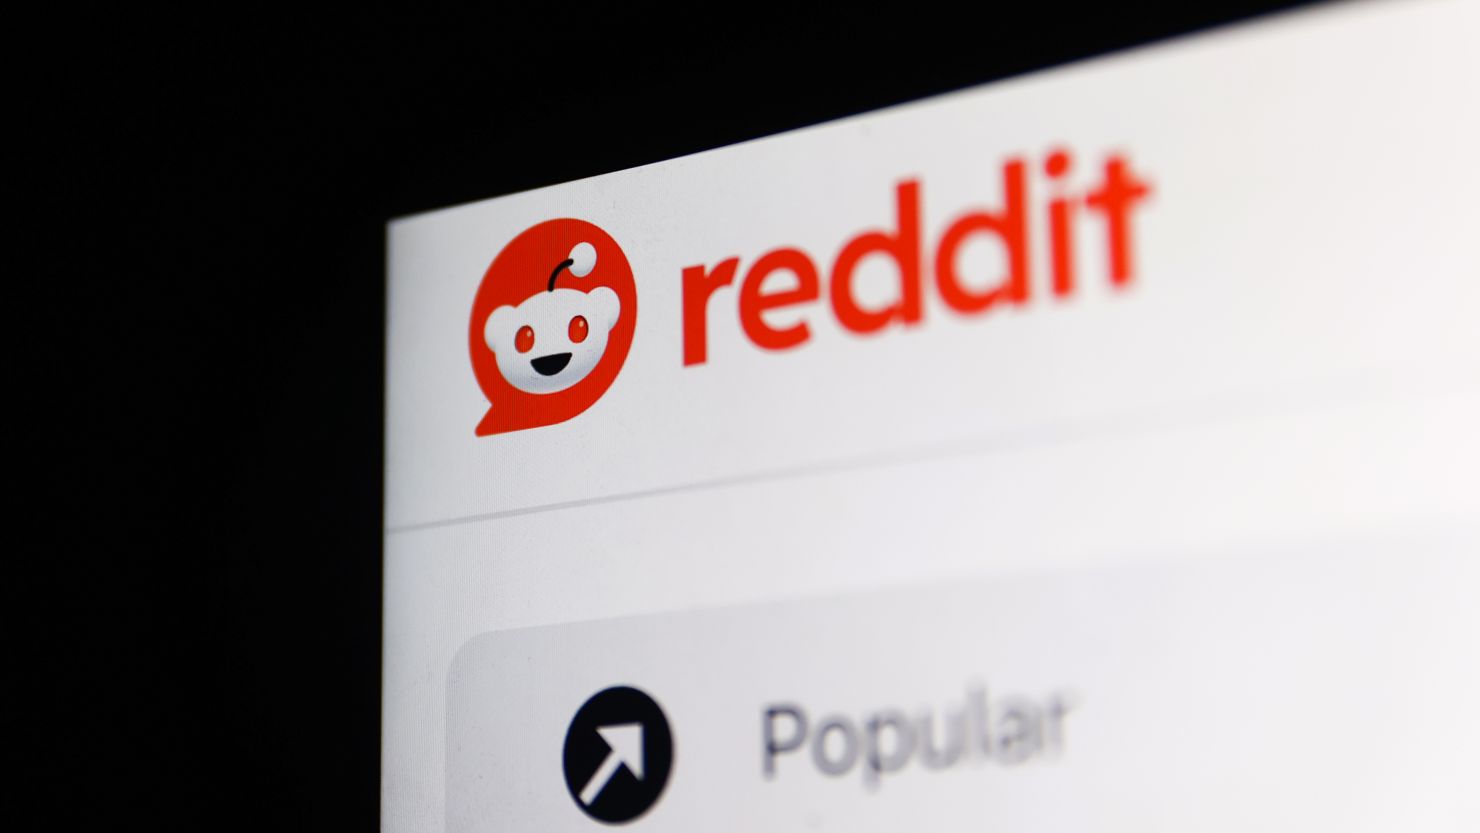 Reddit logo on the website displayed on a laptop screen. Reddit on Thursday filed to go public, nearly 20 years after its launch.